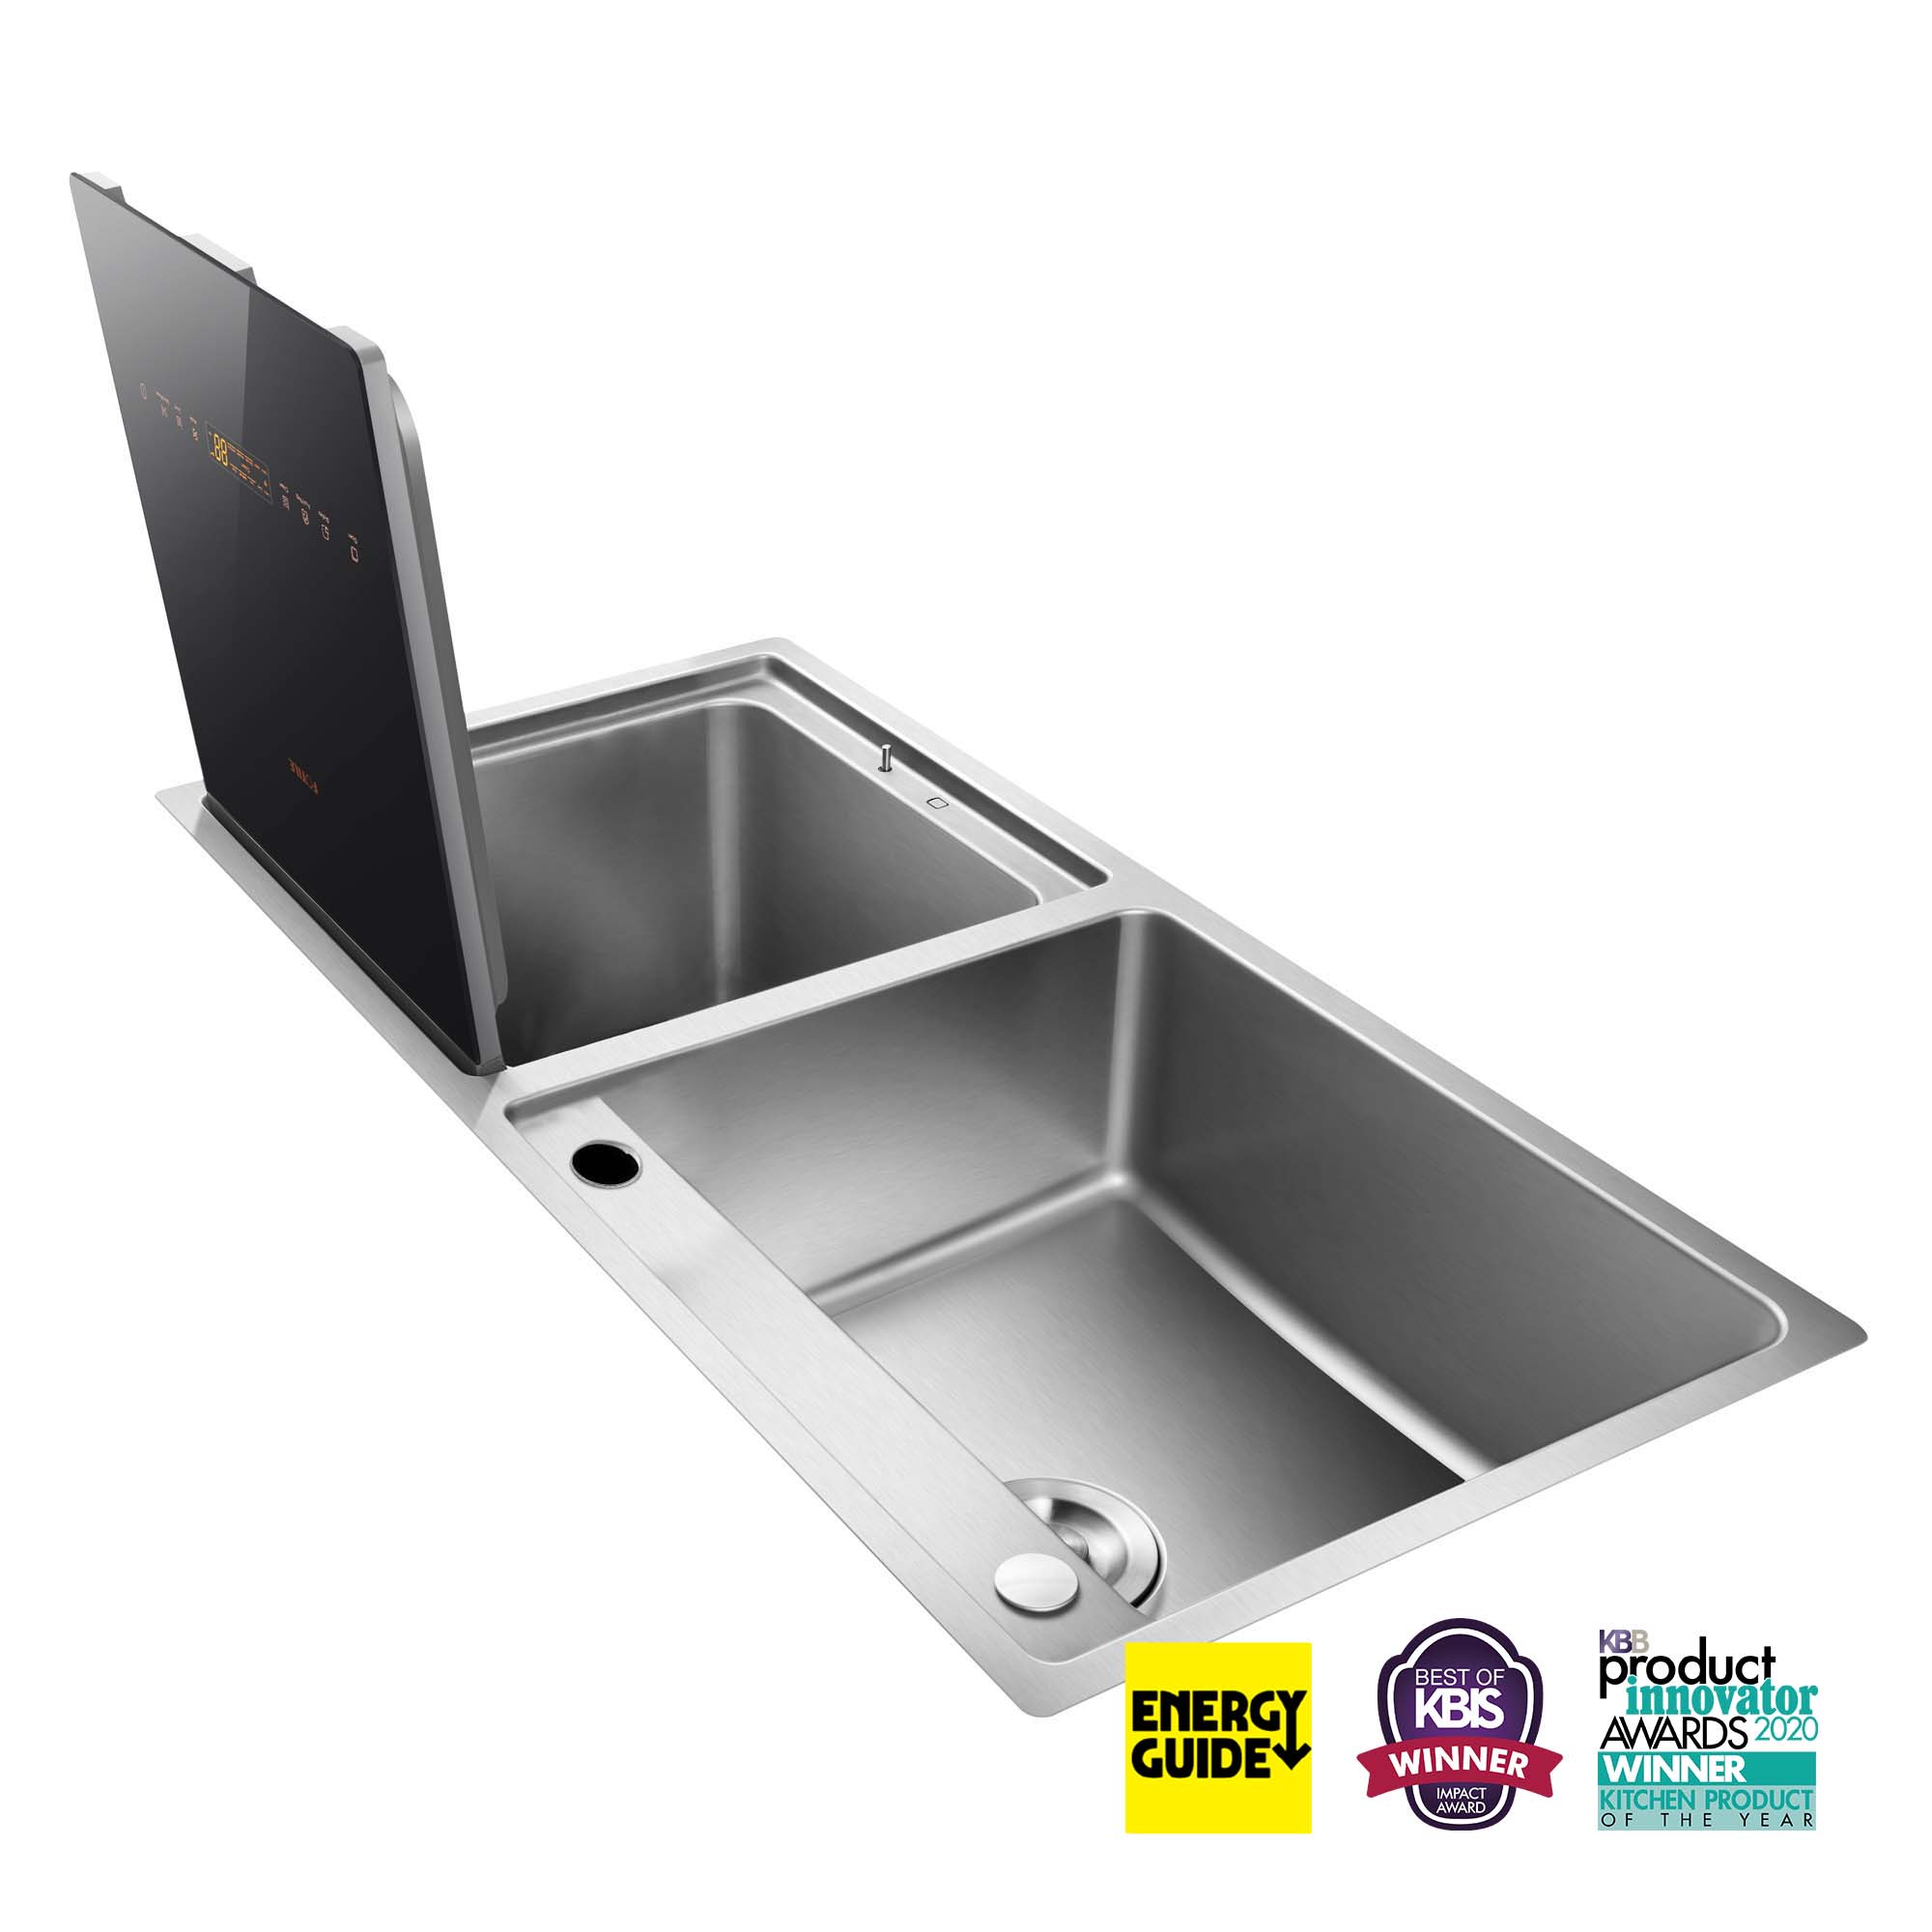 Buy online Stylish & High Quality 2-IN-1 In-Sink Dishwasher SD2F-P3 | Buy Family-oriented Appliances. - FOTILE